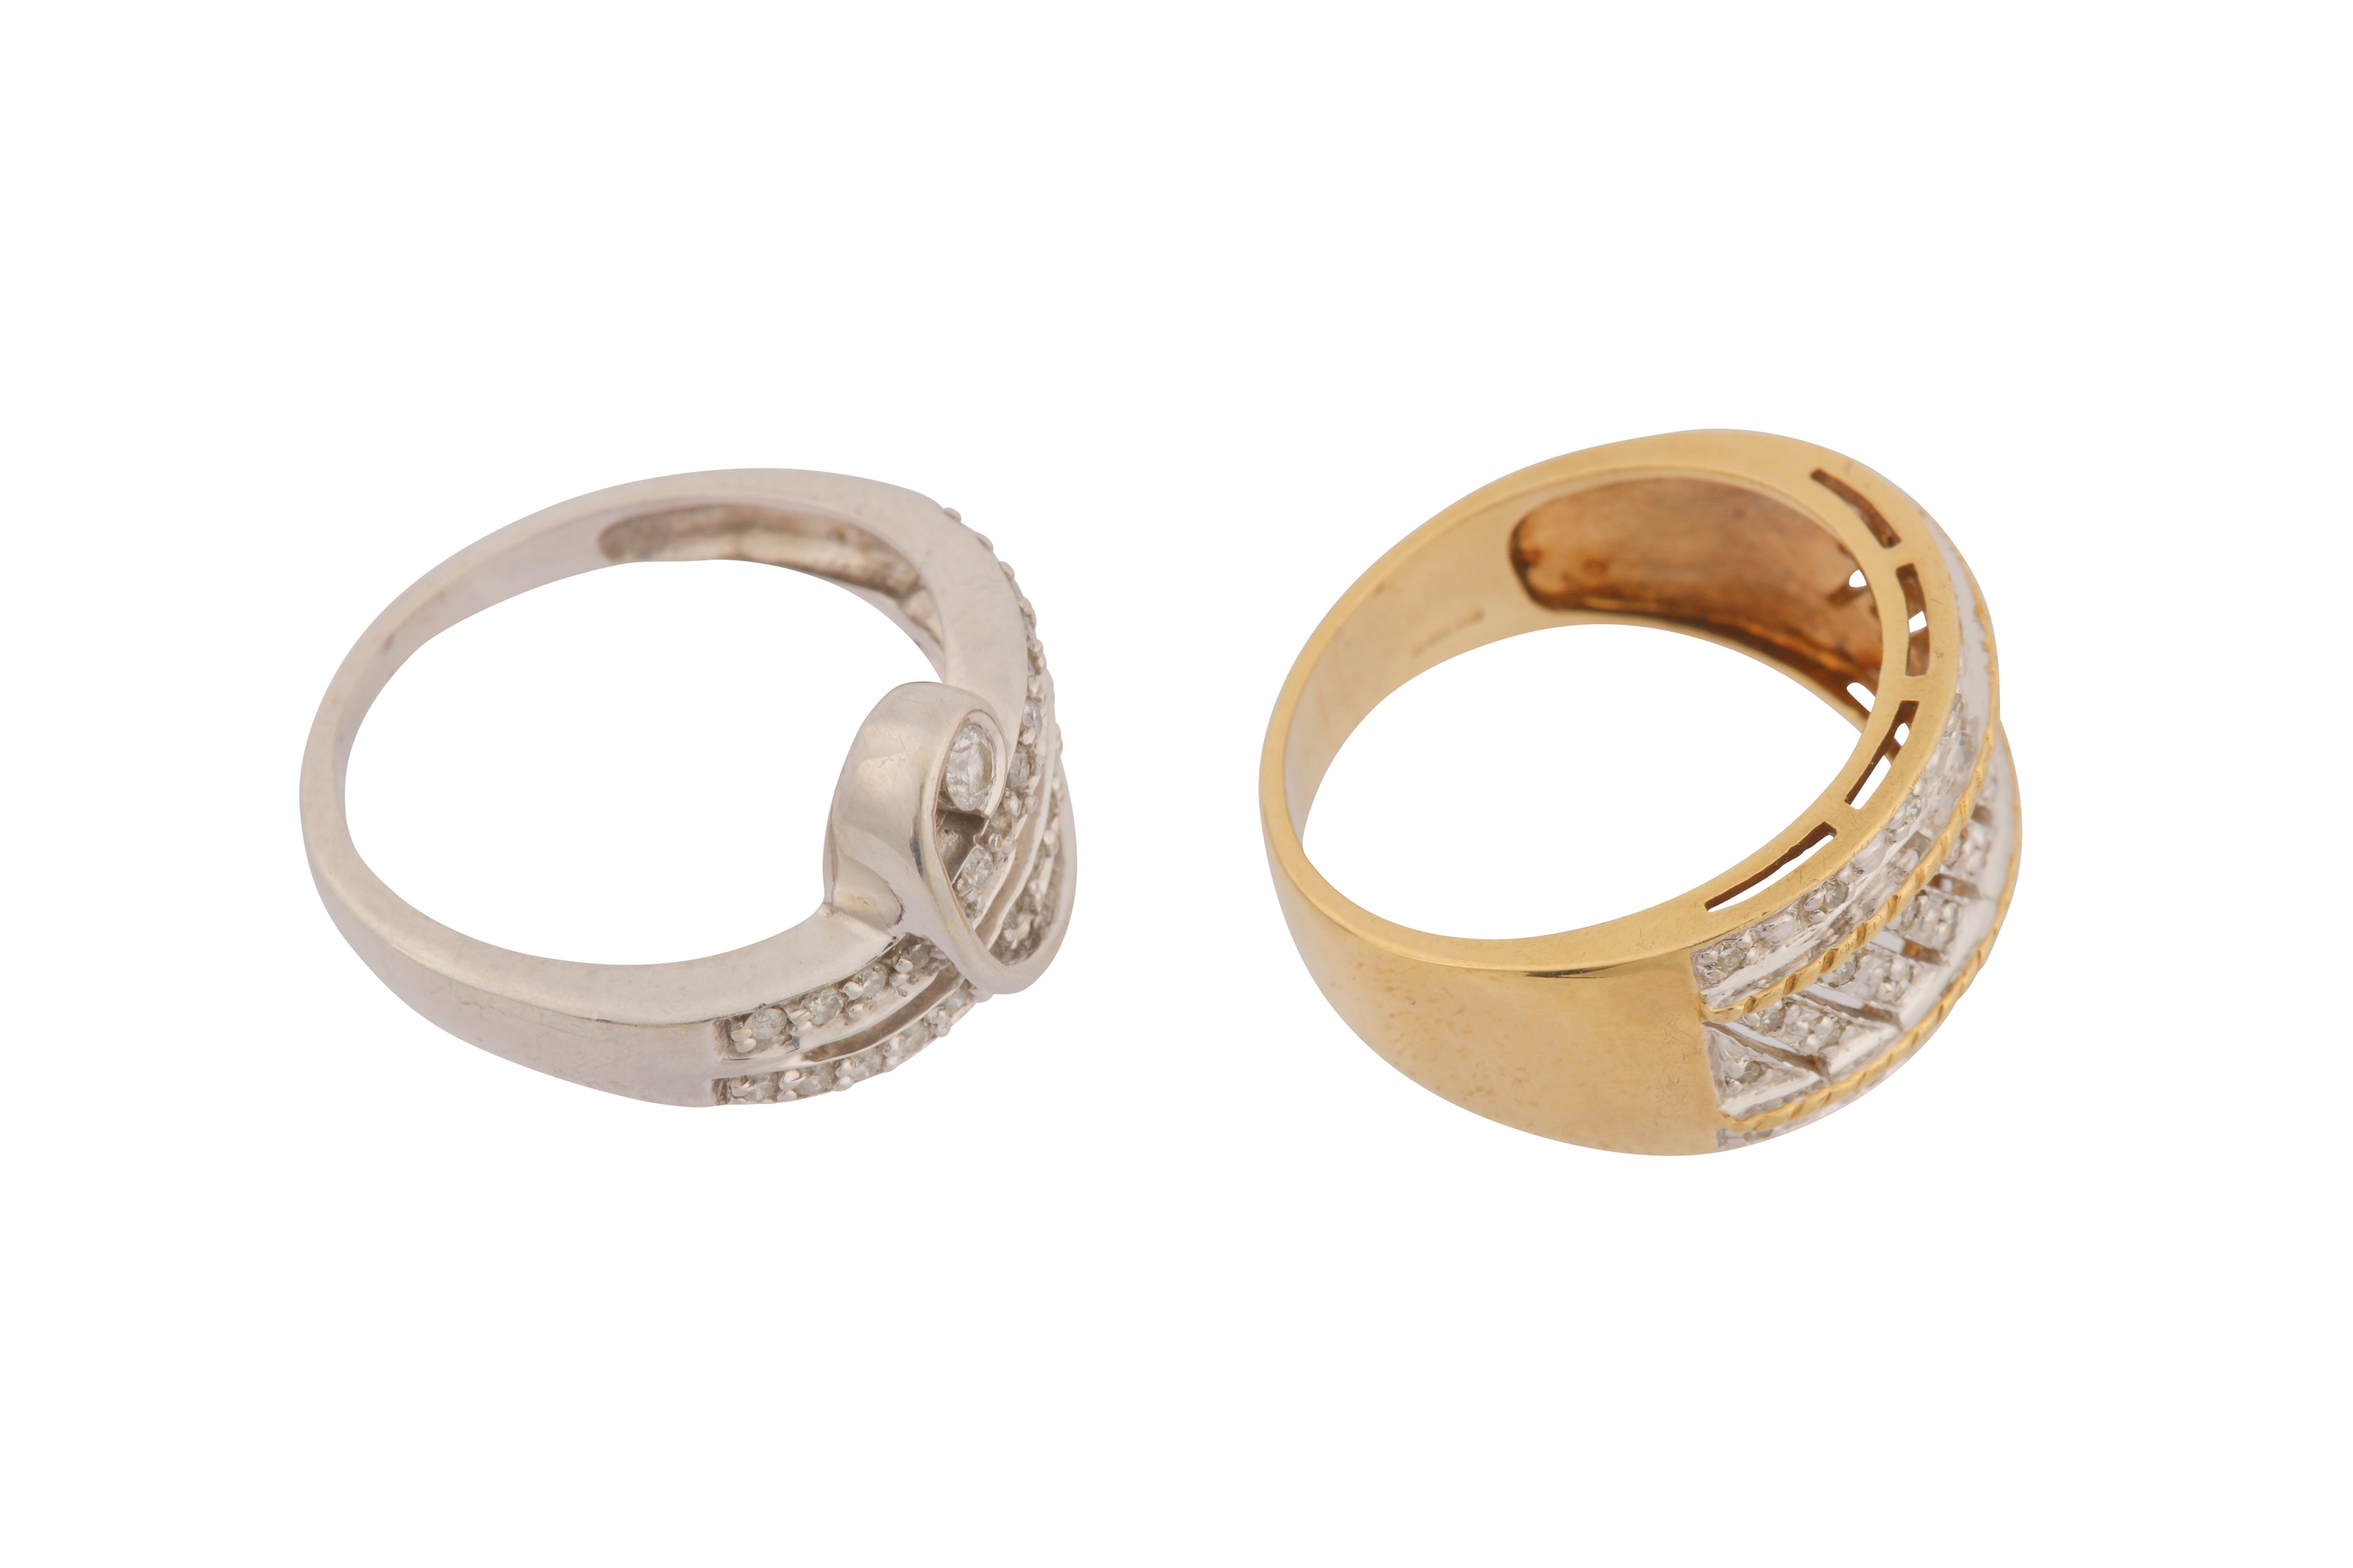 TWO 9CT GOLD DIAMOND RINGS - Image 2 of 2